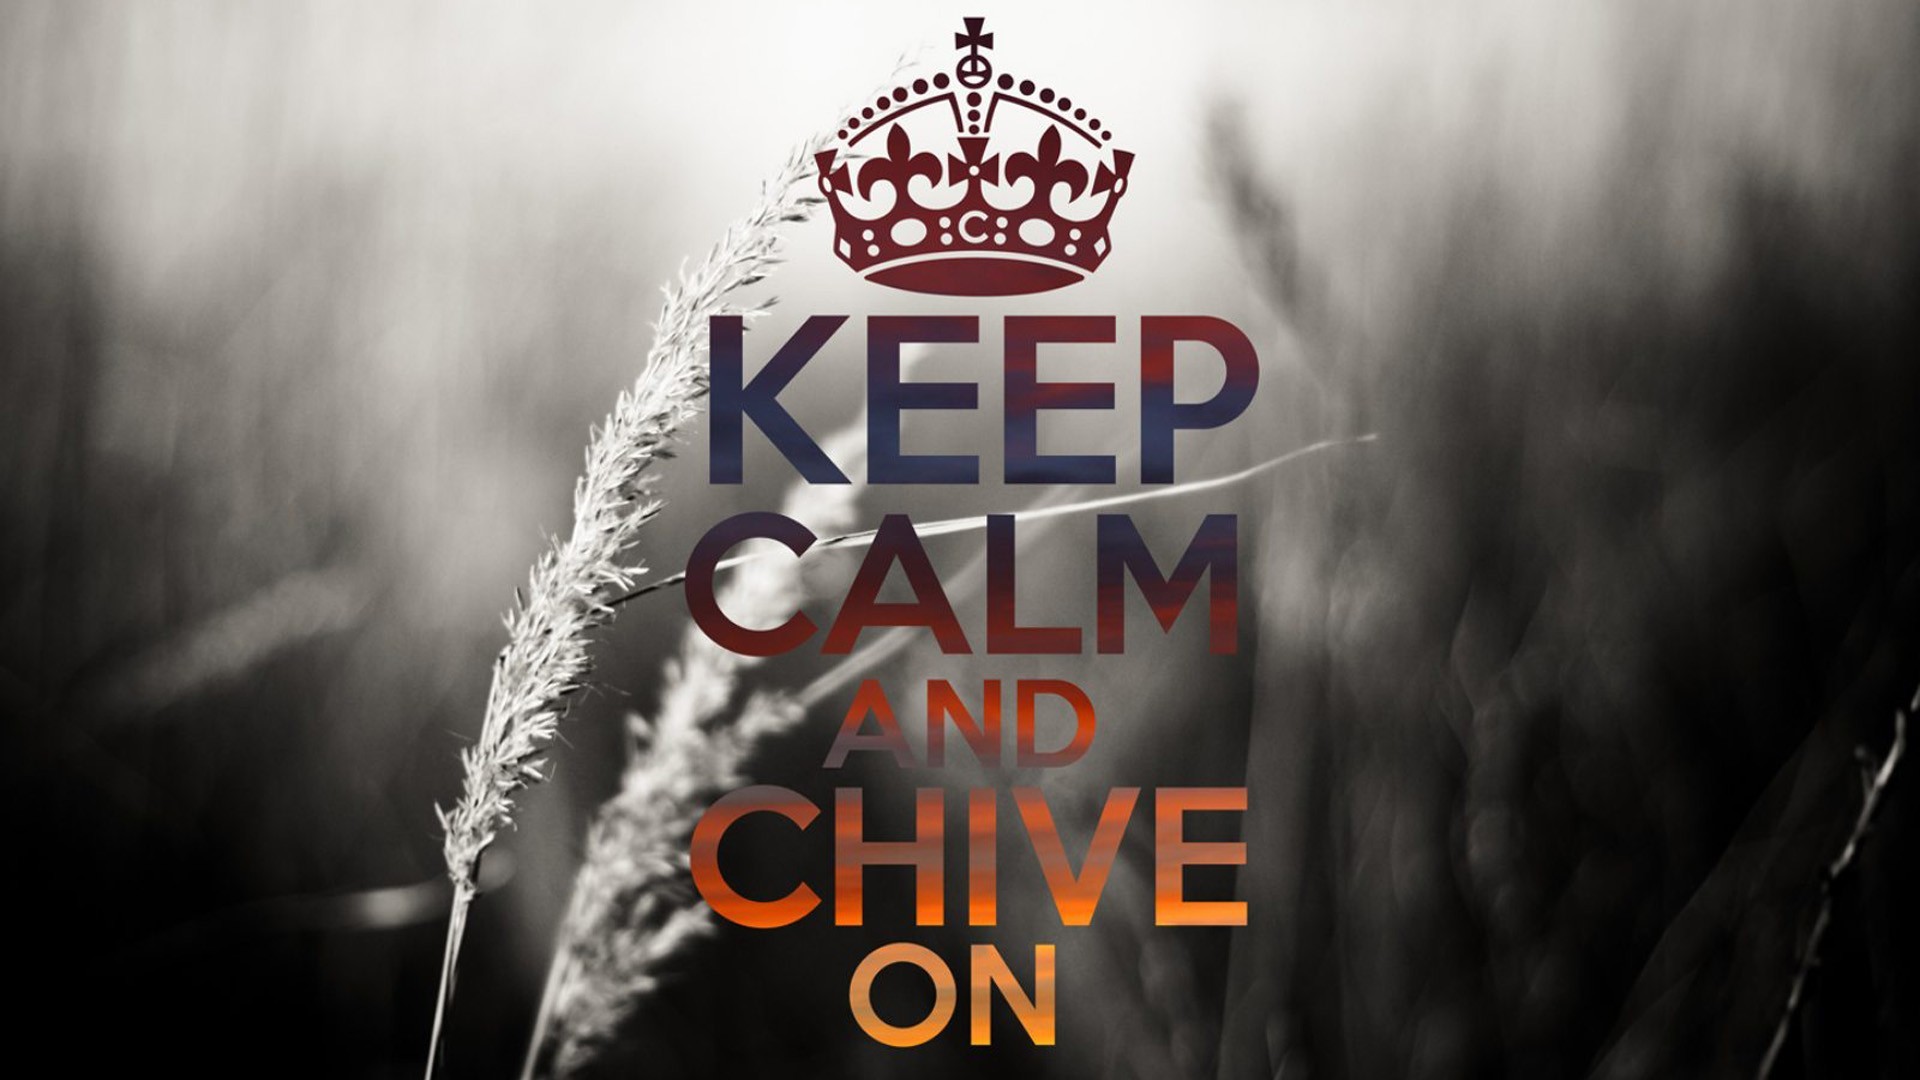 1920x1080 Keep Calm And Chive On Wallpaper - http://wallpaperzoo.com/keep